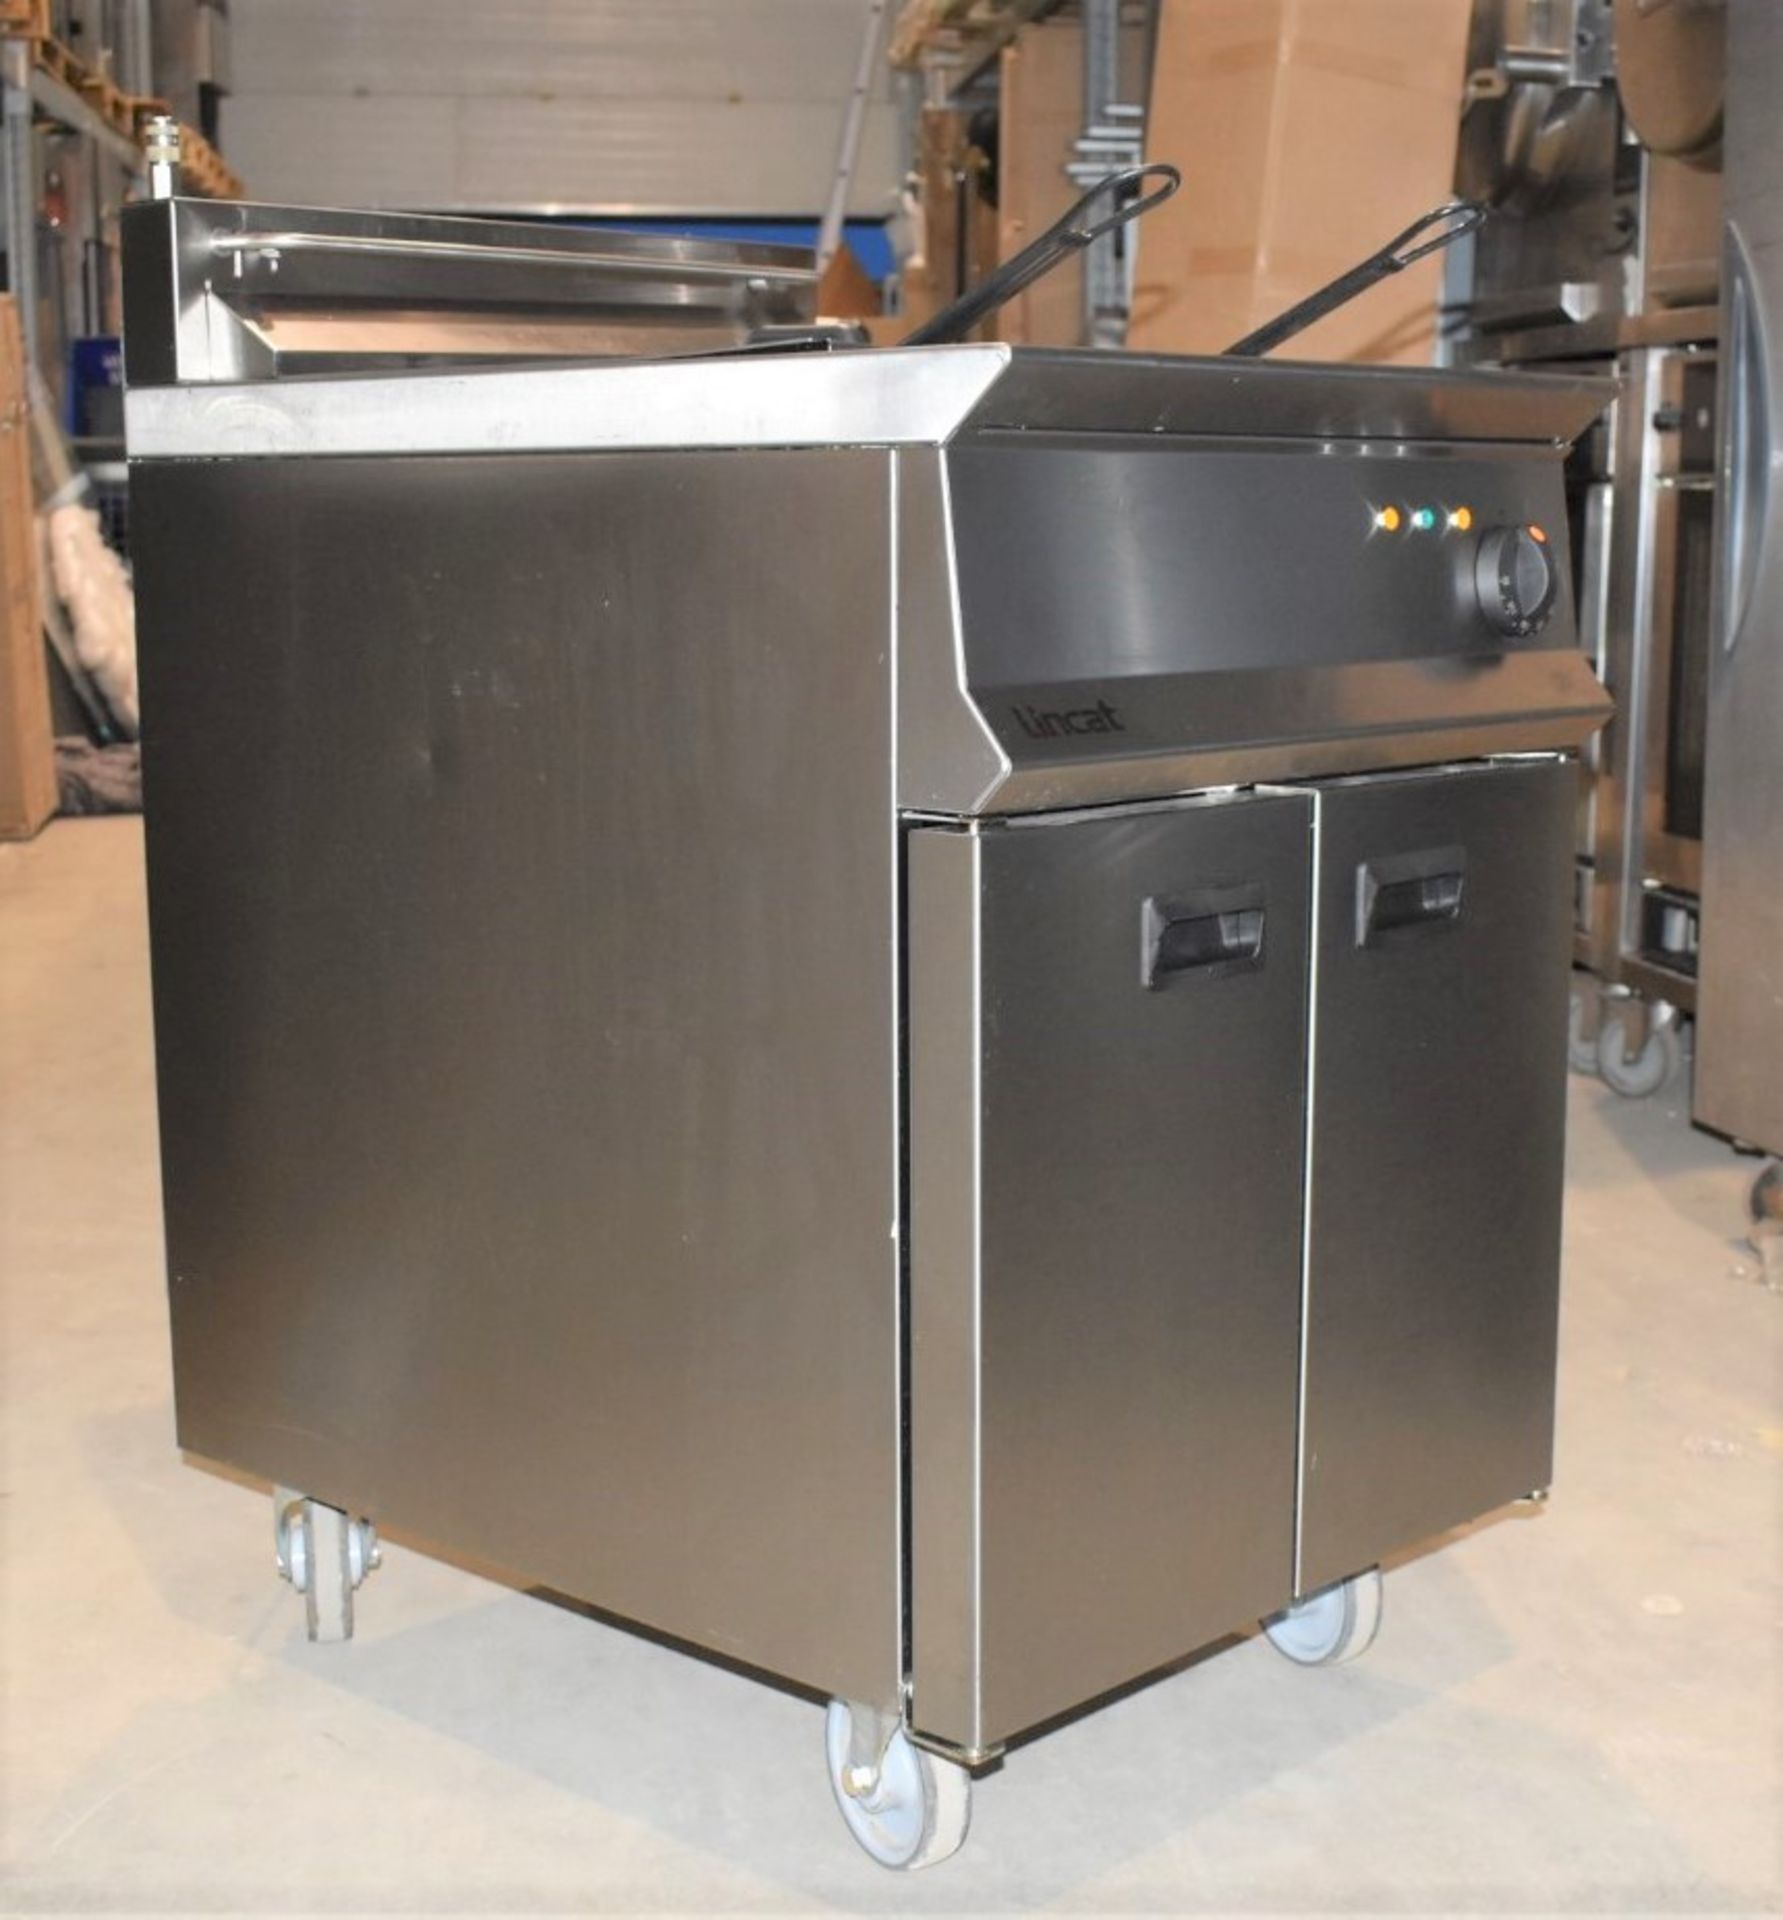 1 x Lincat Opus 800 OE8108 Single Tank Electric Fryer With Filtration - 37L Tank With Two Baskets - - Image 12 of 14